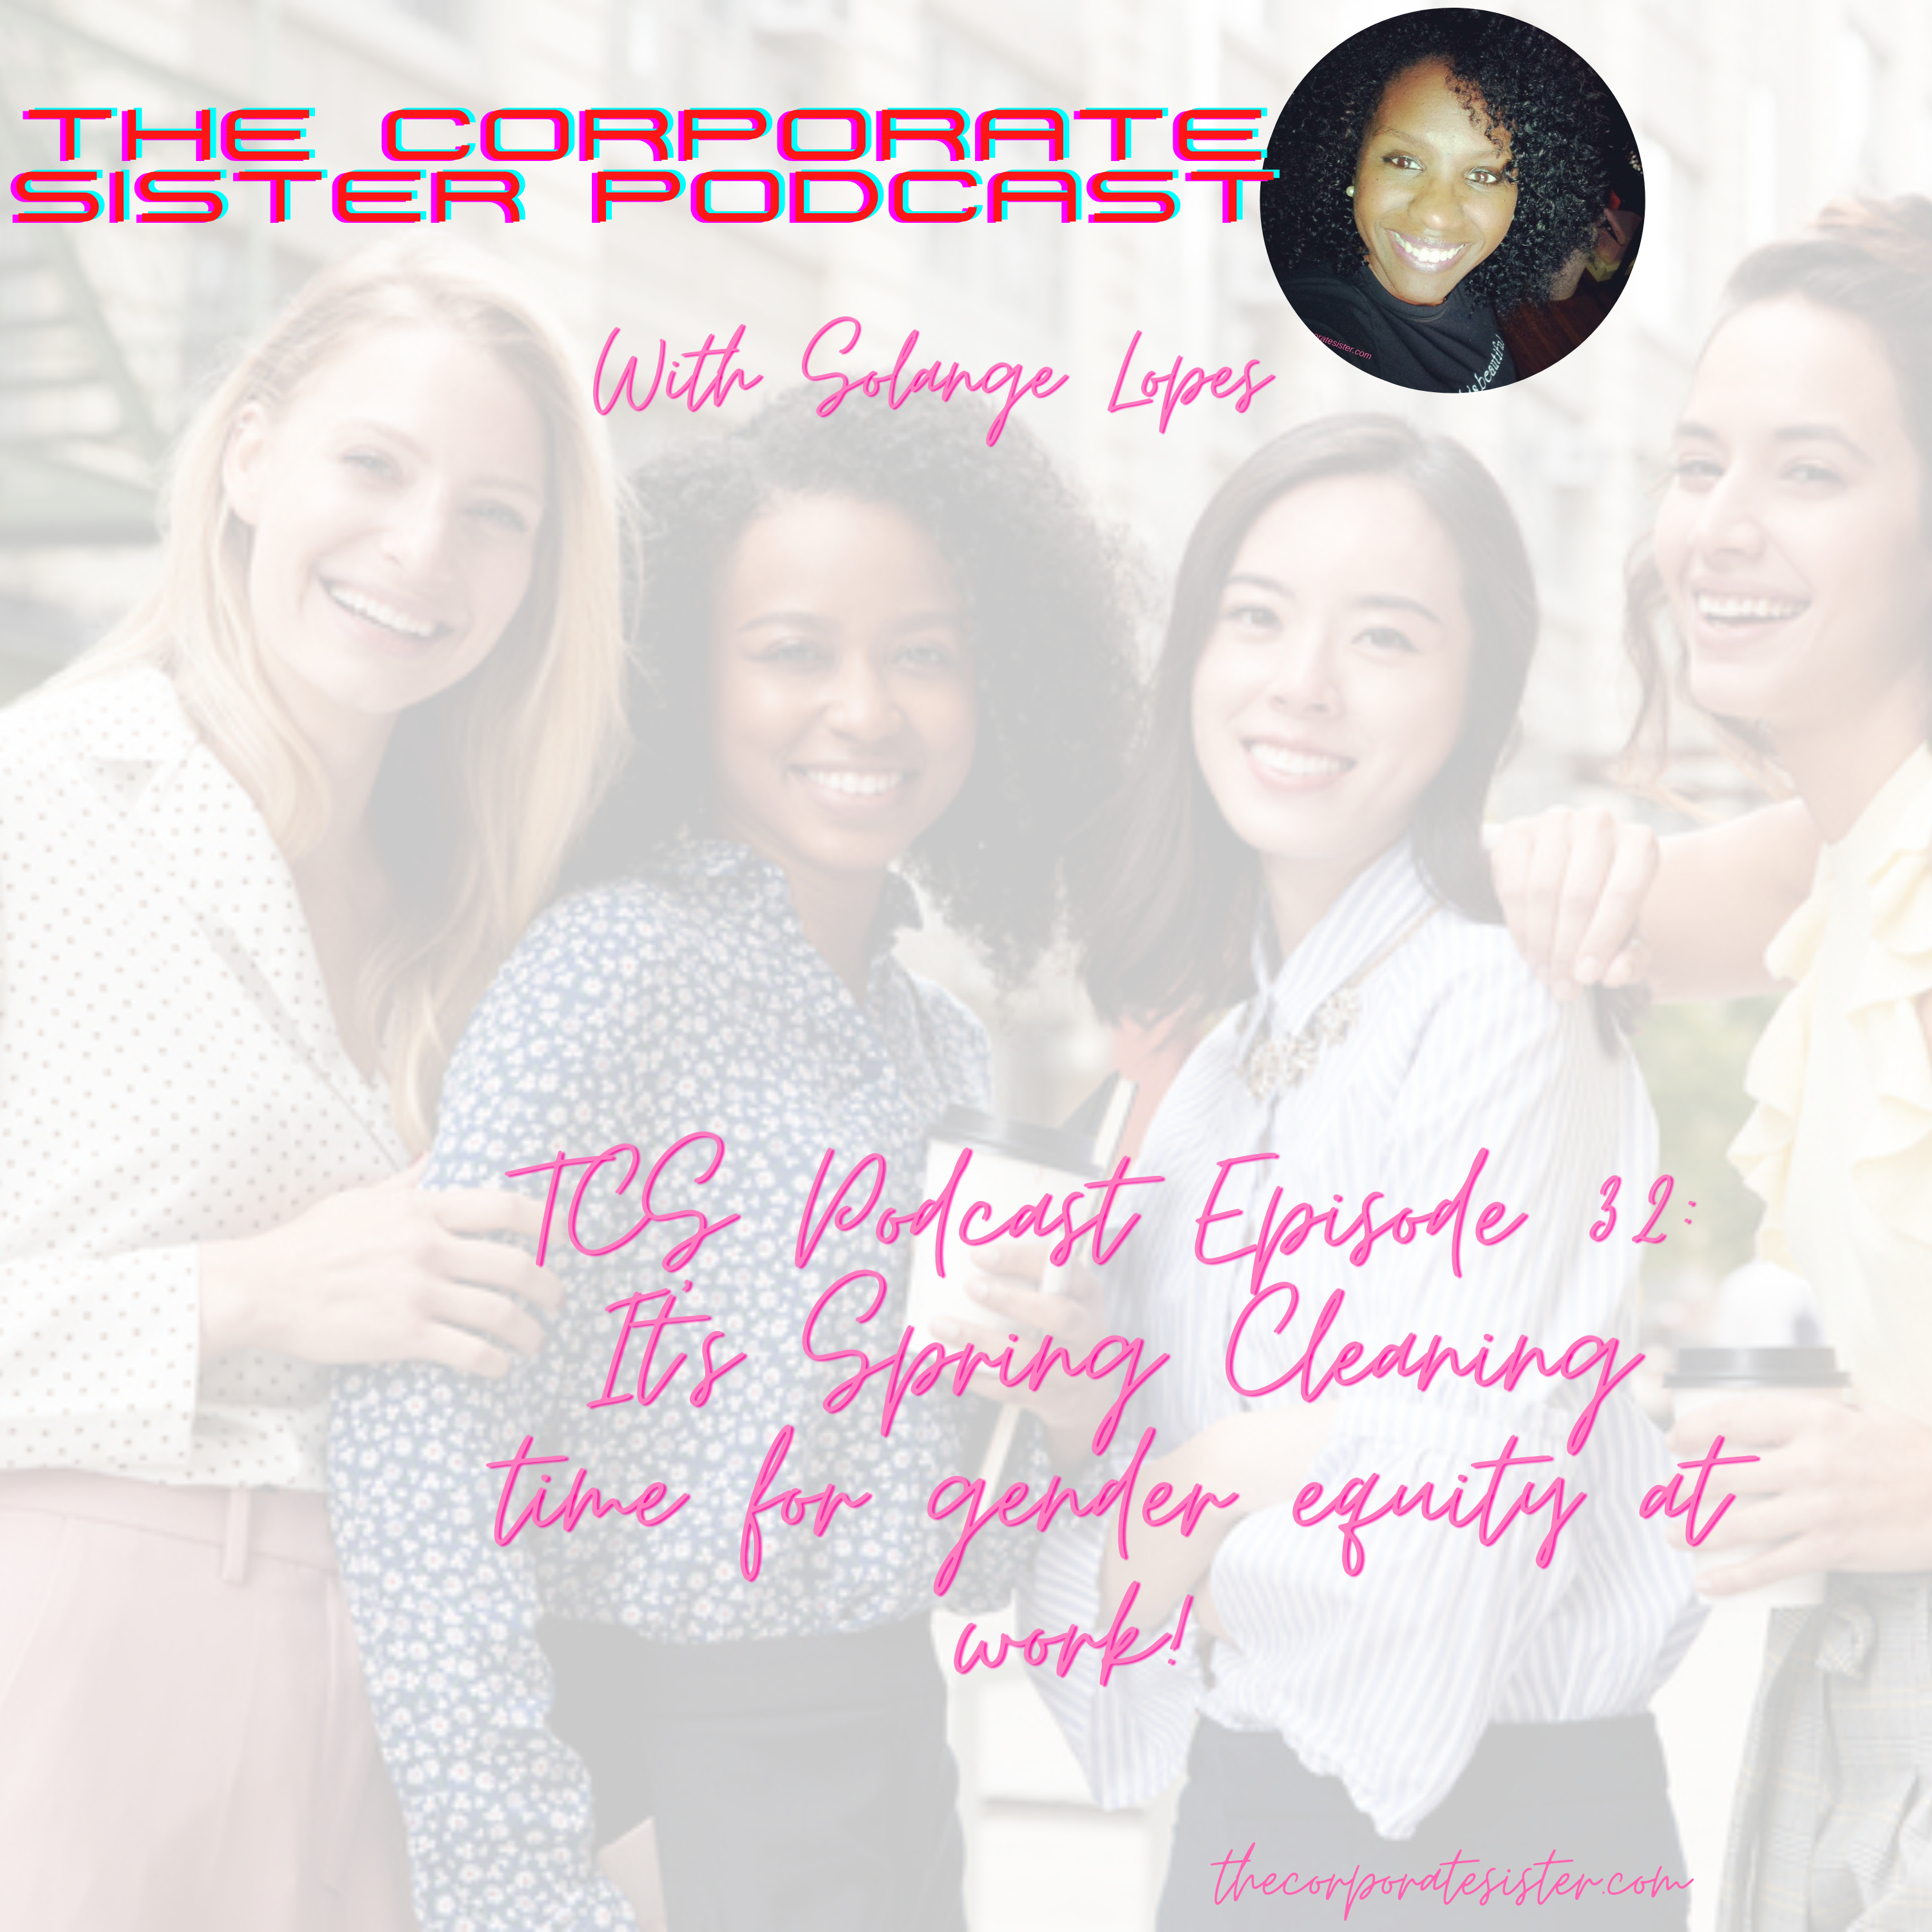 TCS Episode 32: Spring cleaning time for gender equity at work!